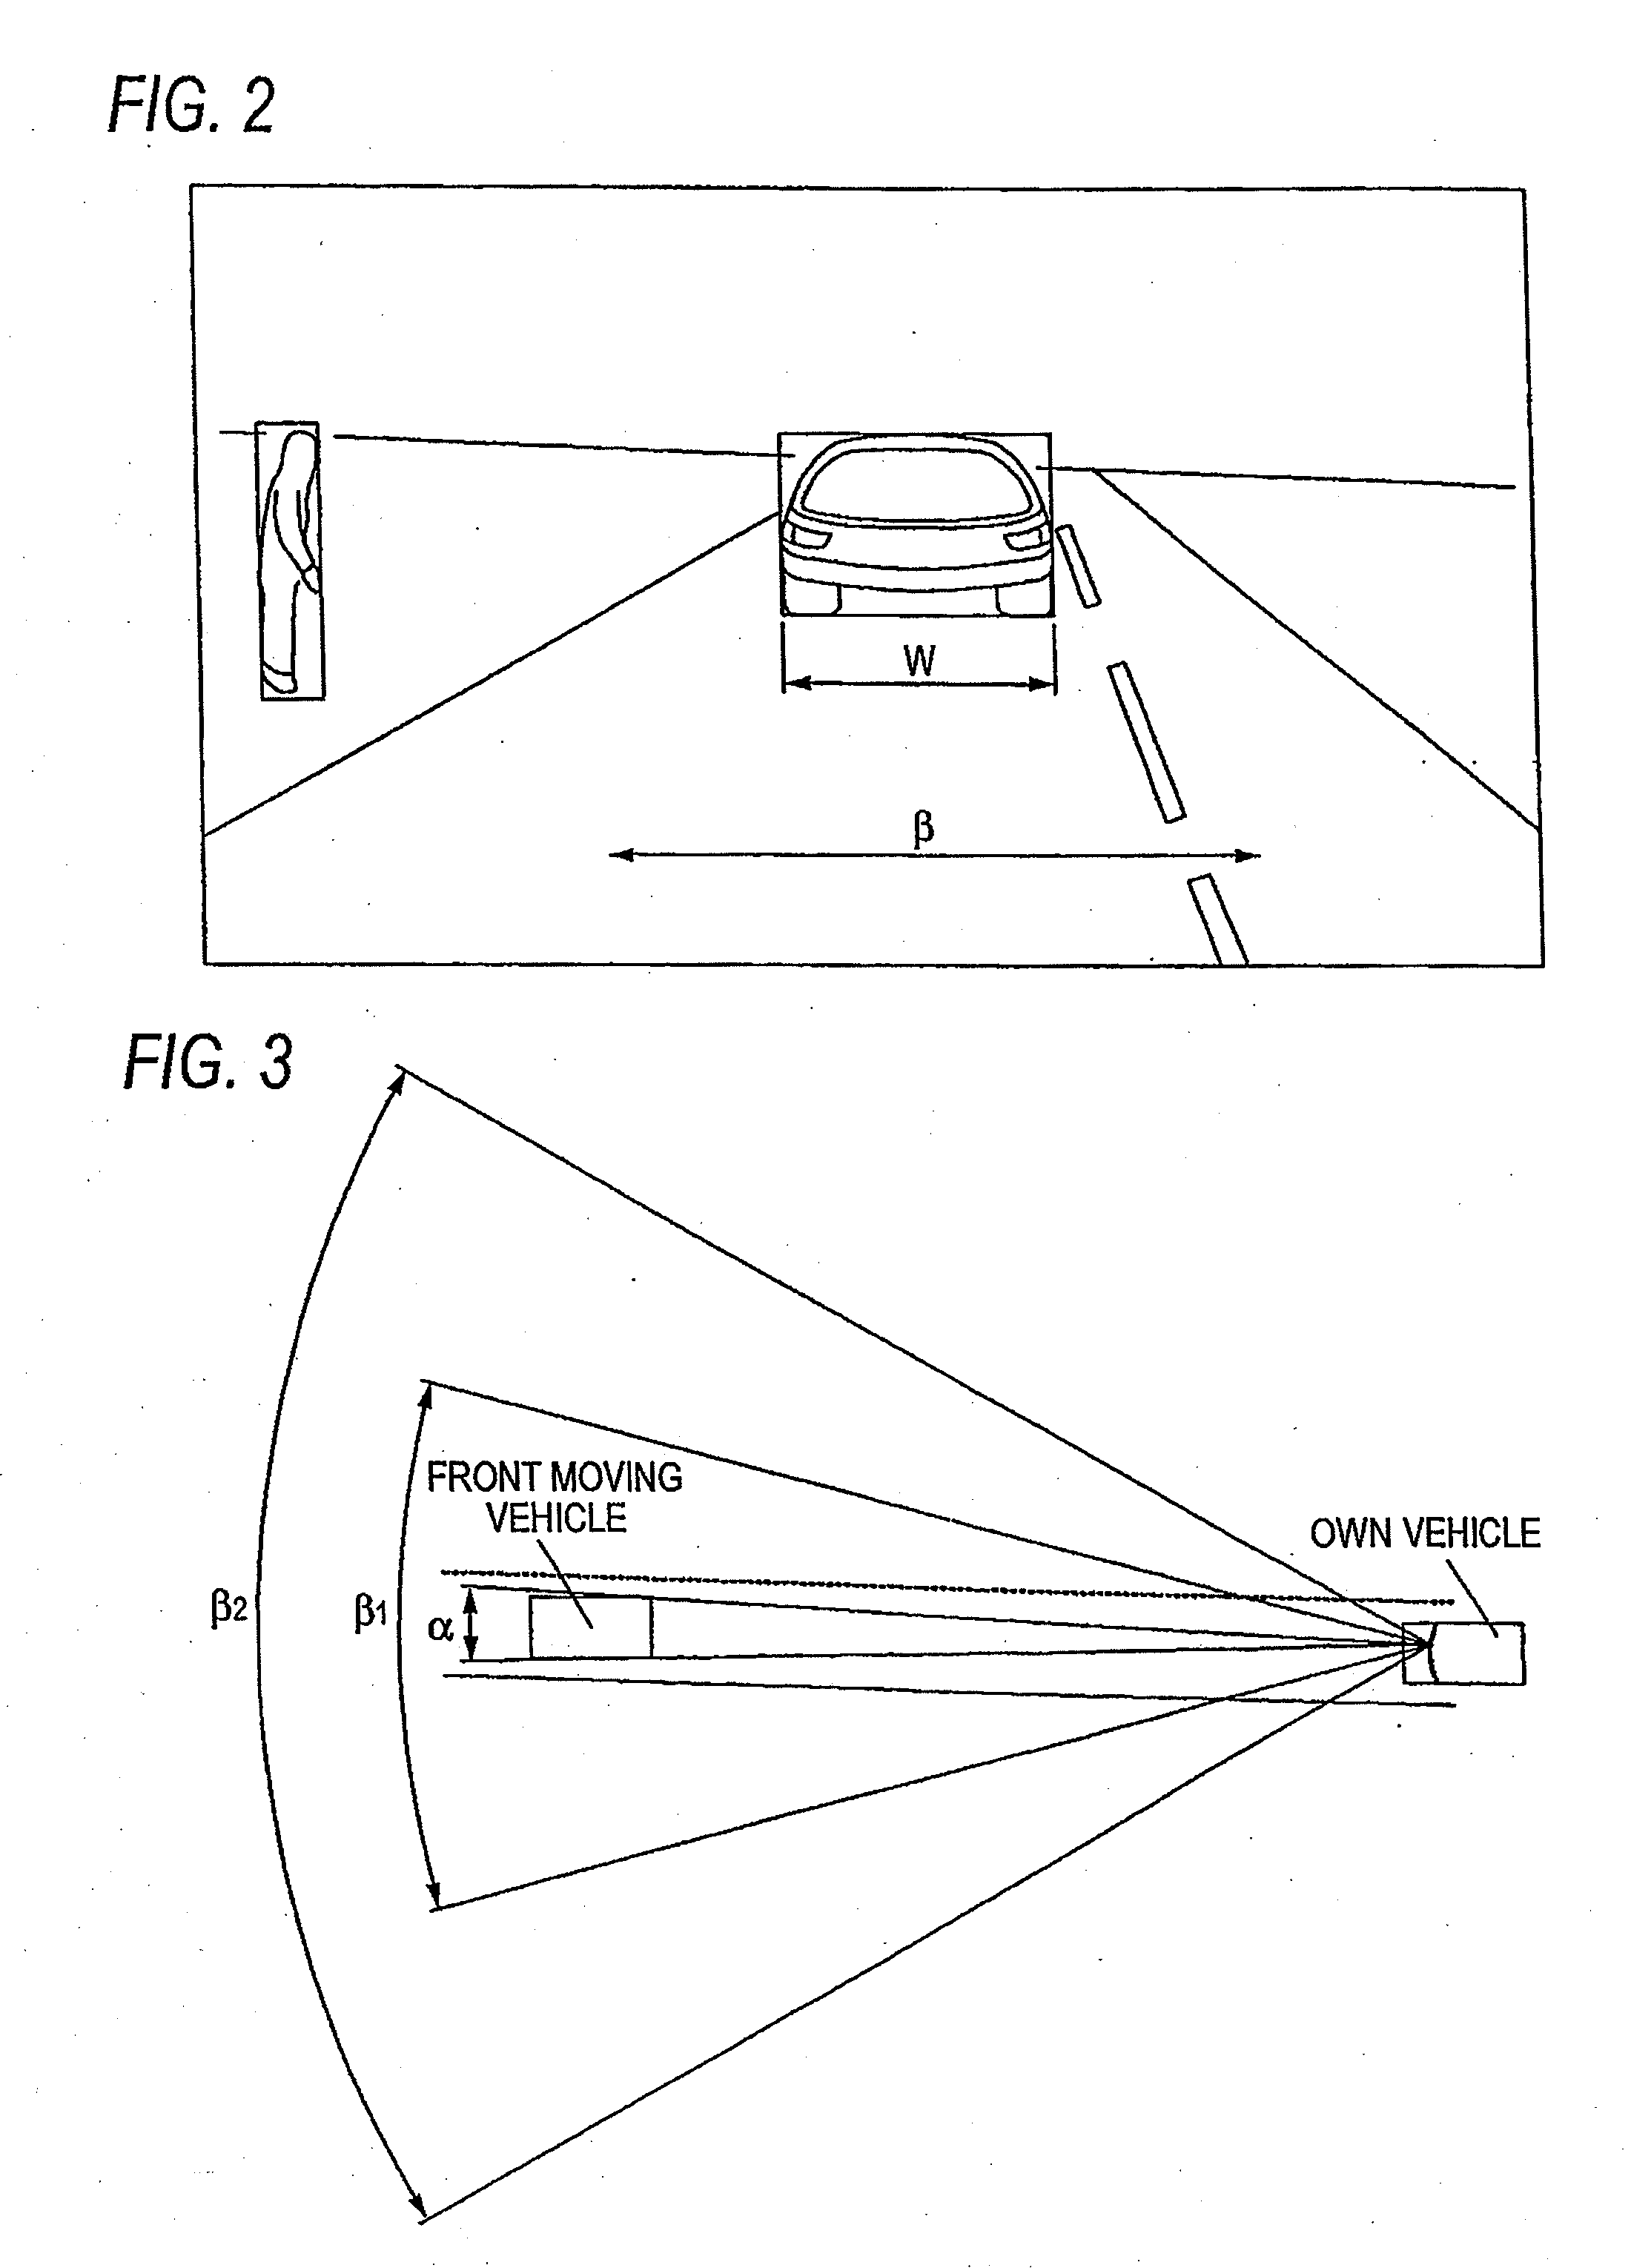 Method for Supporting A Driver Using Fragrance Emissions